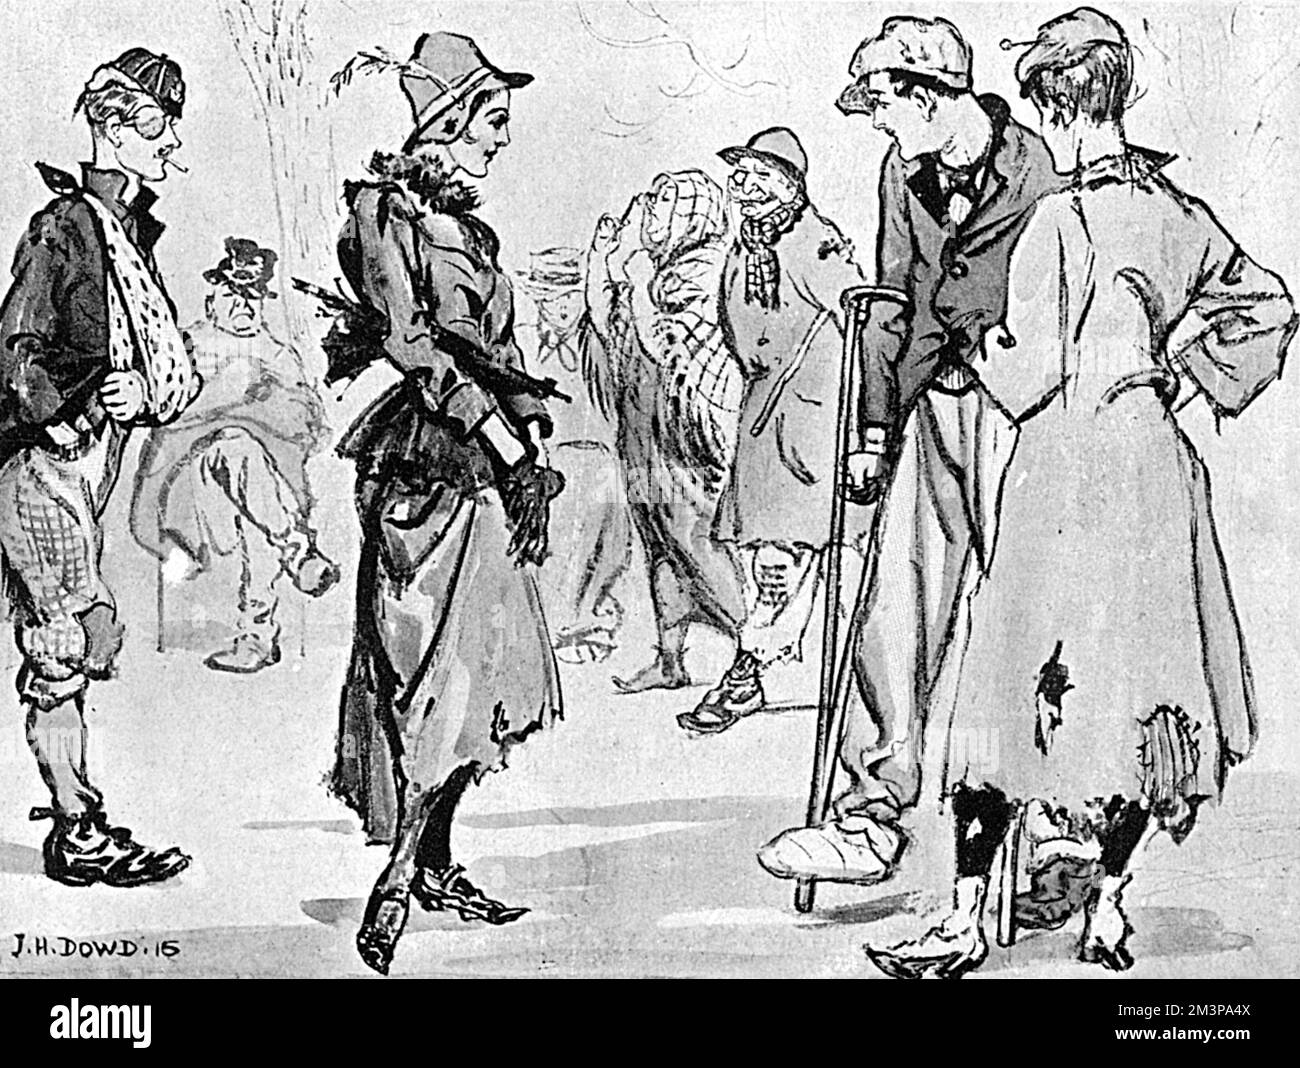 A slightly comedic illustration in Hyde Park, showing the effect of WW1 on the upper classes. Shown in rags, the only sign of their class is the style of their clothes with a suggestion that this was a possible scenario given the worsening economic situation.     Date: 1916 Stock Photo